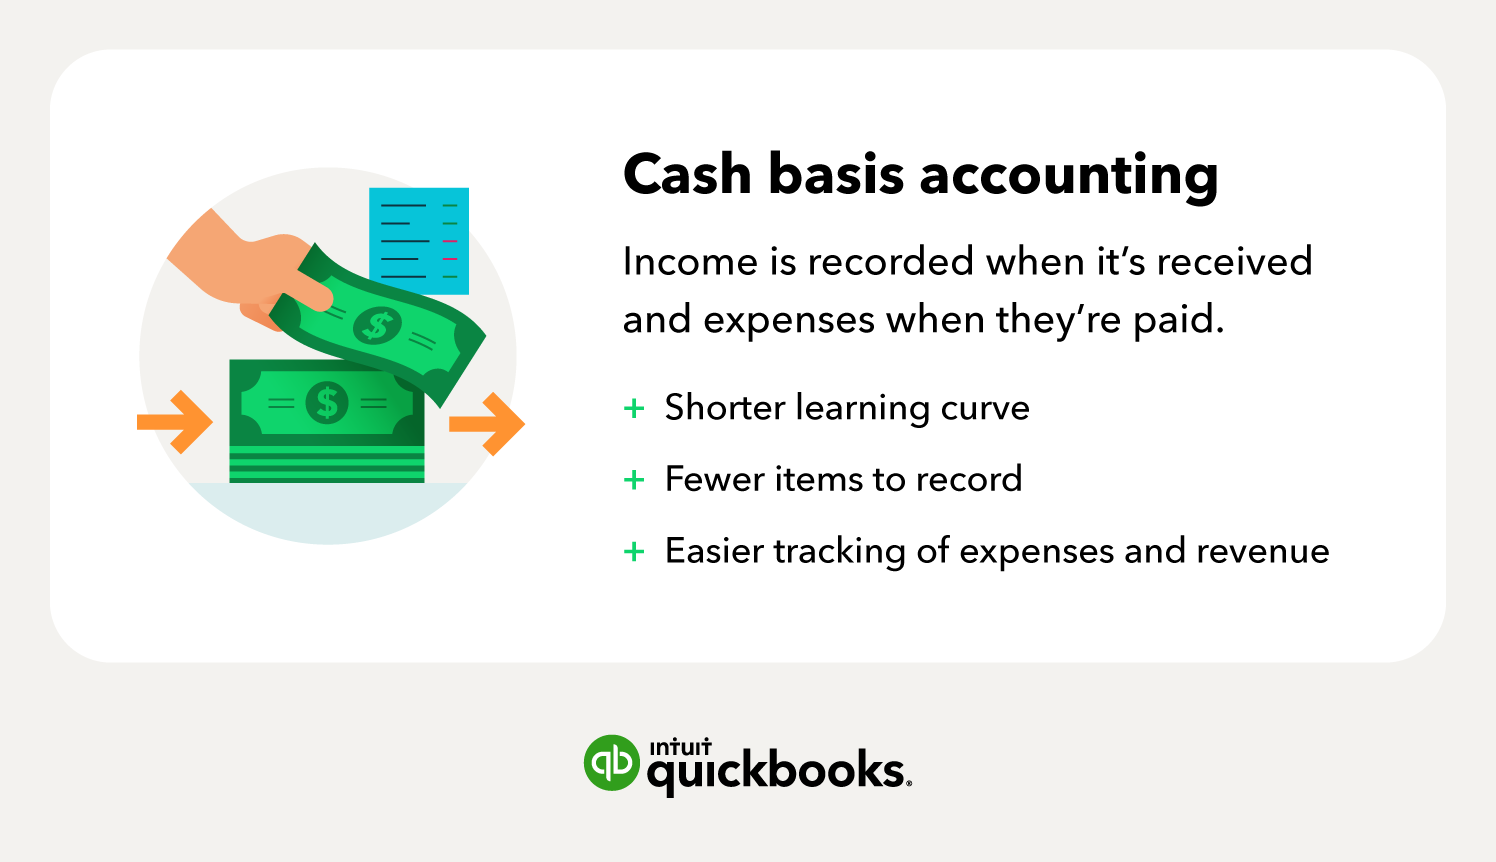 Cash basis accounting -Shorter learning curve Fewer items to record Easier tracking of expenses and revenue